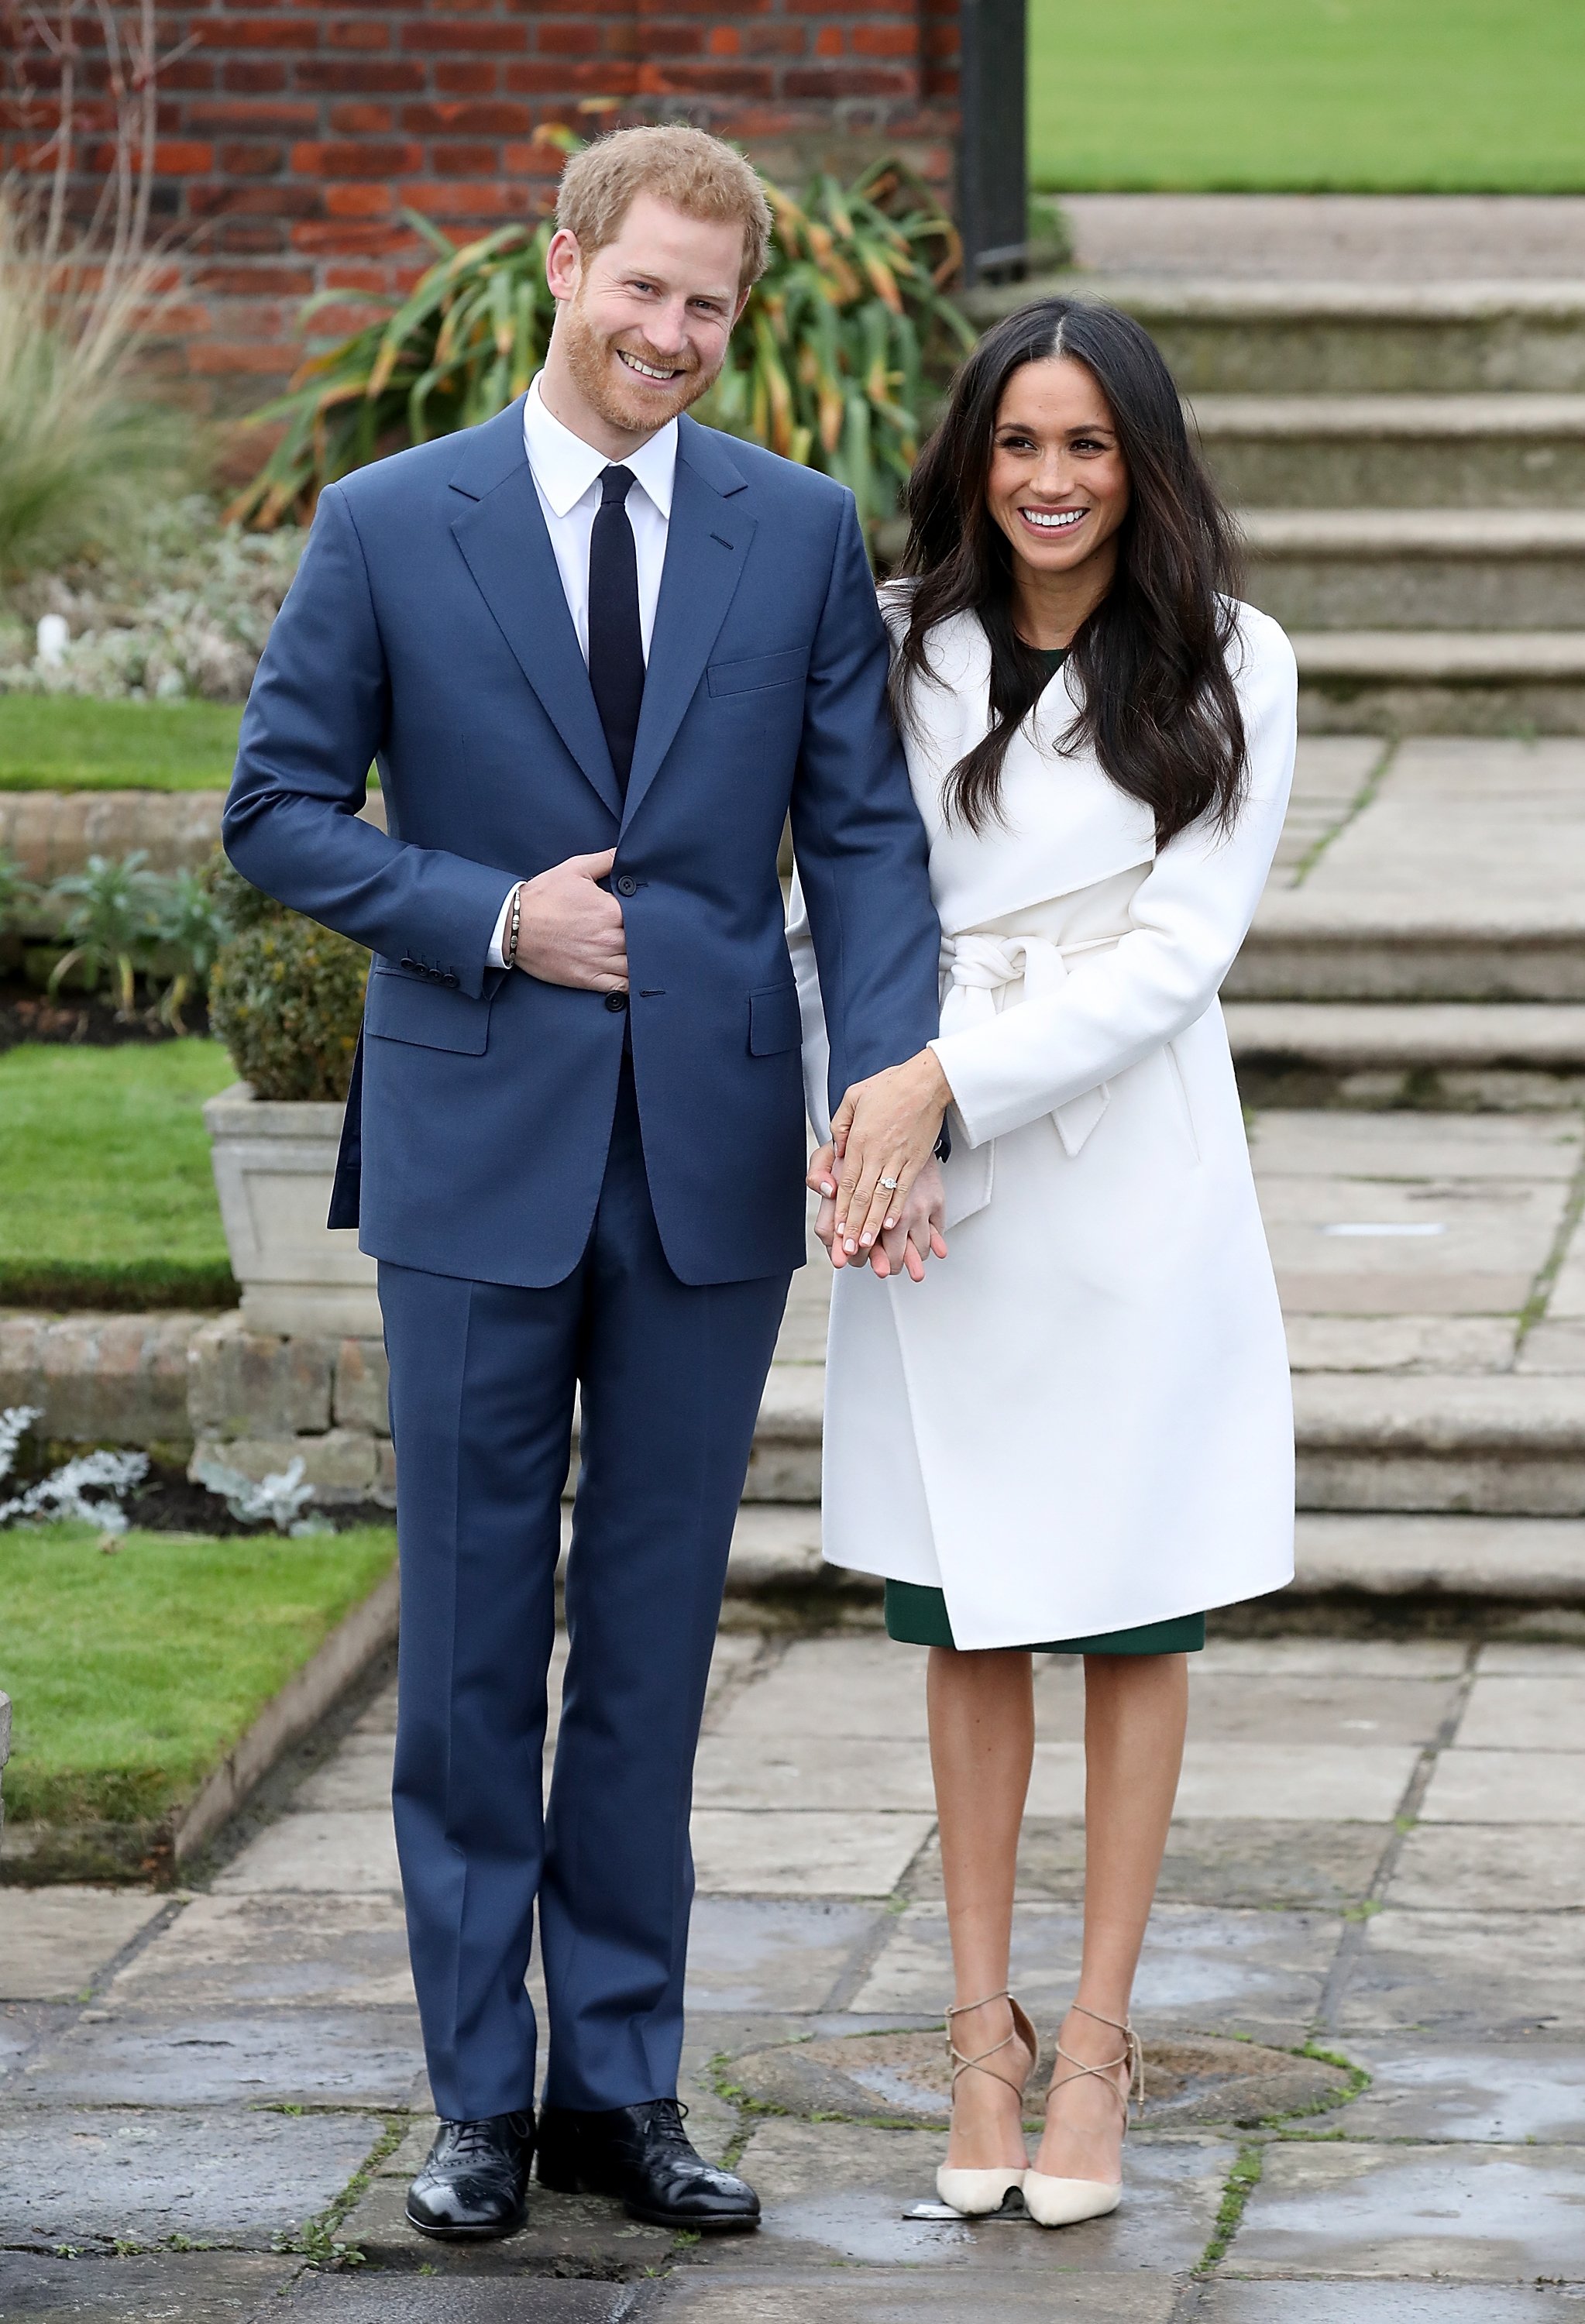 Prince Harry and Meghan Markle in an official photocall to announce their engagement on November 27, 2017, in London | Source: Getty Images